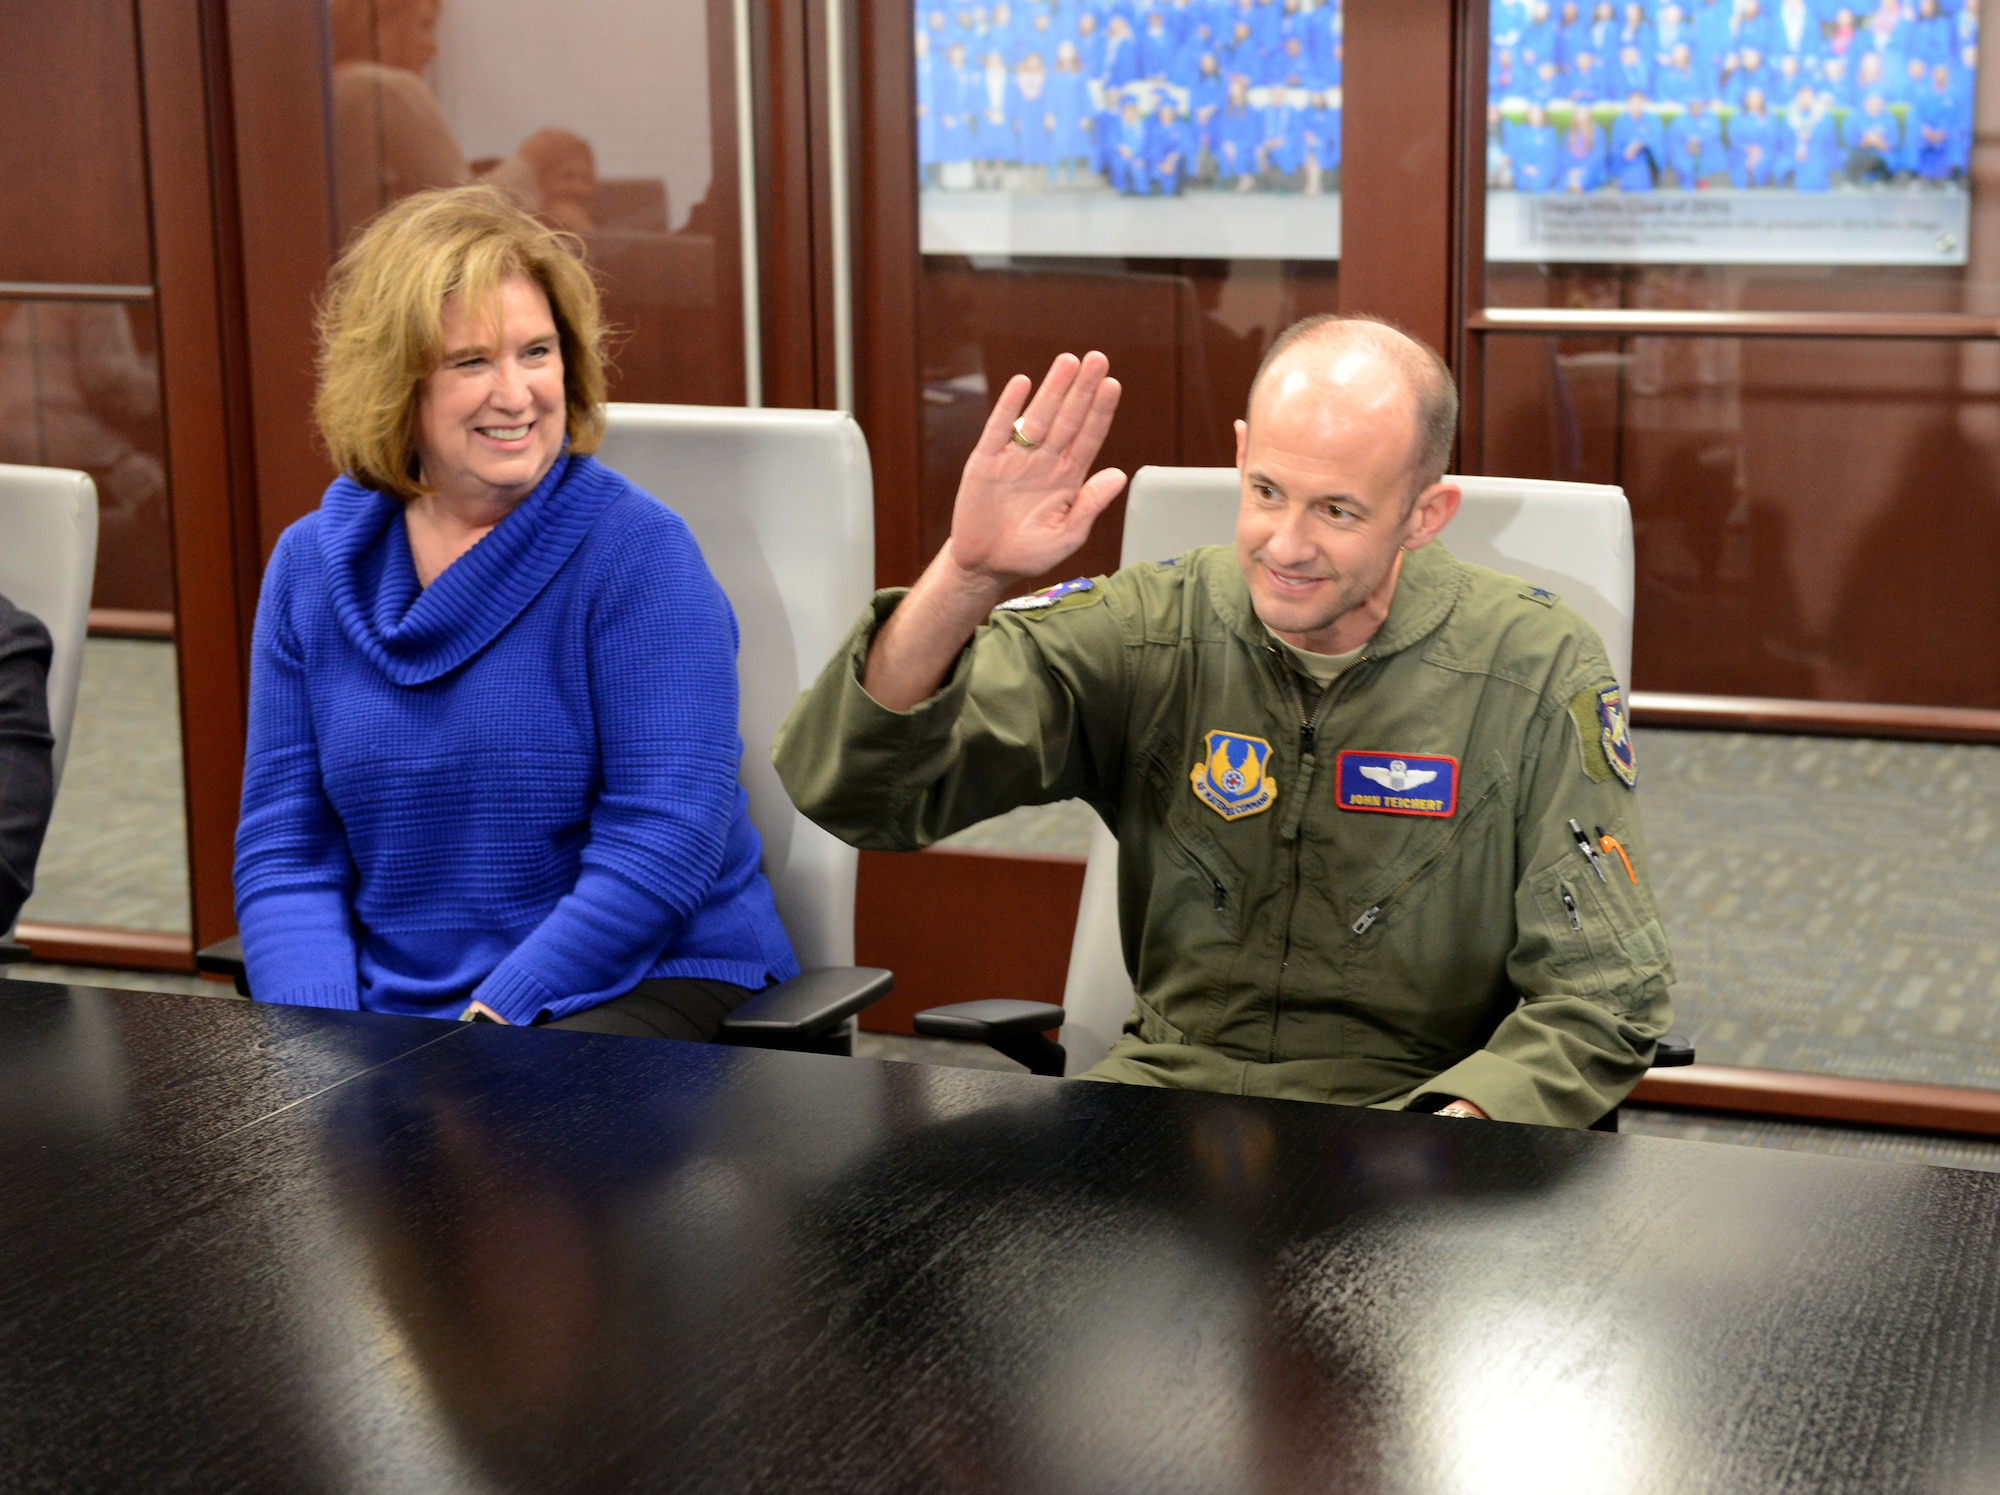 Brig. Gen. E. John Teichert, 412th Test Wing commander, raises his hand to "slap the table" to symbolically solidify a formal multi-year partnership to conduct alternating air shows within the region at the Learn4Life meeting room in Lancaster, California, March 13. This paves the way to resume air shows at Edwards Air Force Base, the new schedule will bring a “double header” air show year for the region, with air shows scheduled for March 2020 at General
William J. Fox Air Field in Lancaster and October 2020 at Edwards Air Force Base. After 2020, the air shows will alternate with Edwards’ as the venue on even years, and Fox Field hosting on odd years. (U.S. Air Force photo by Michelle
Thomas)